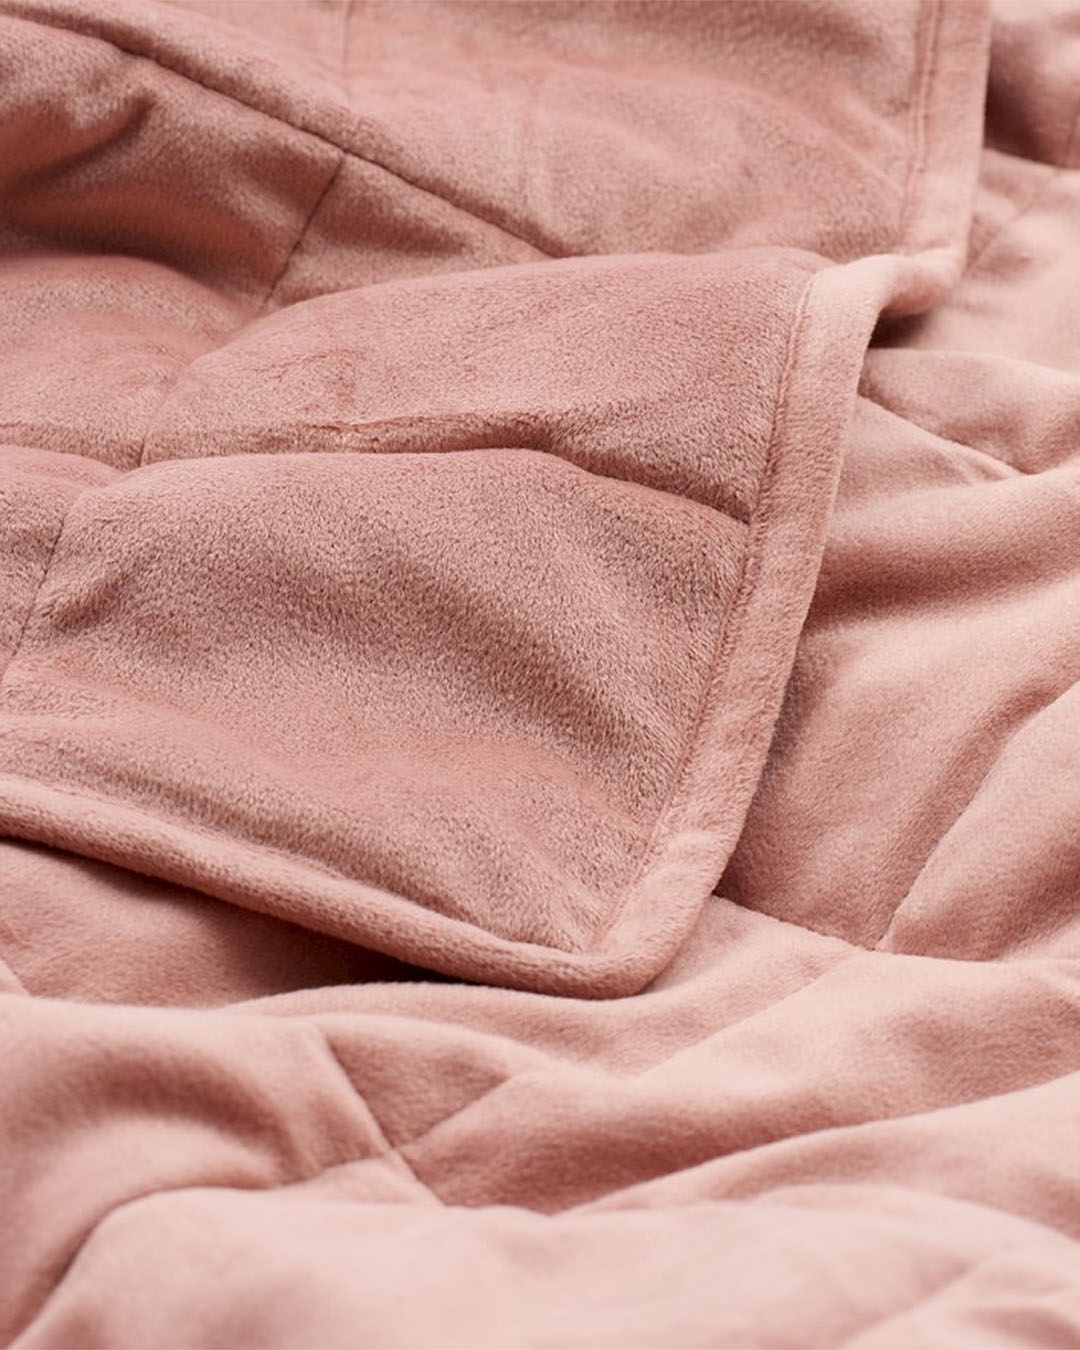 A dusty rose weighted blanket up close and personal.